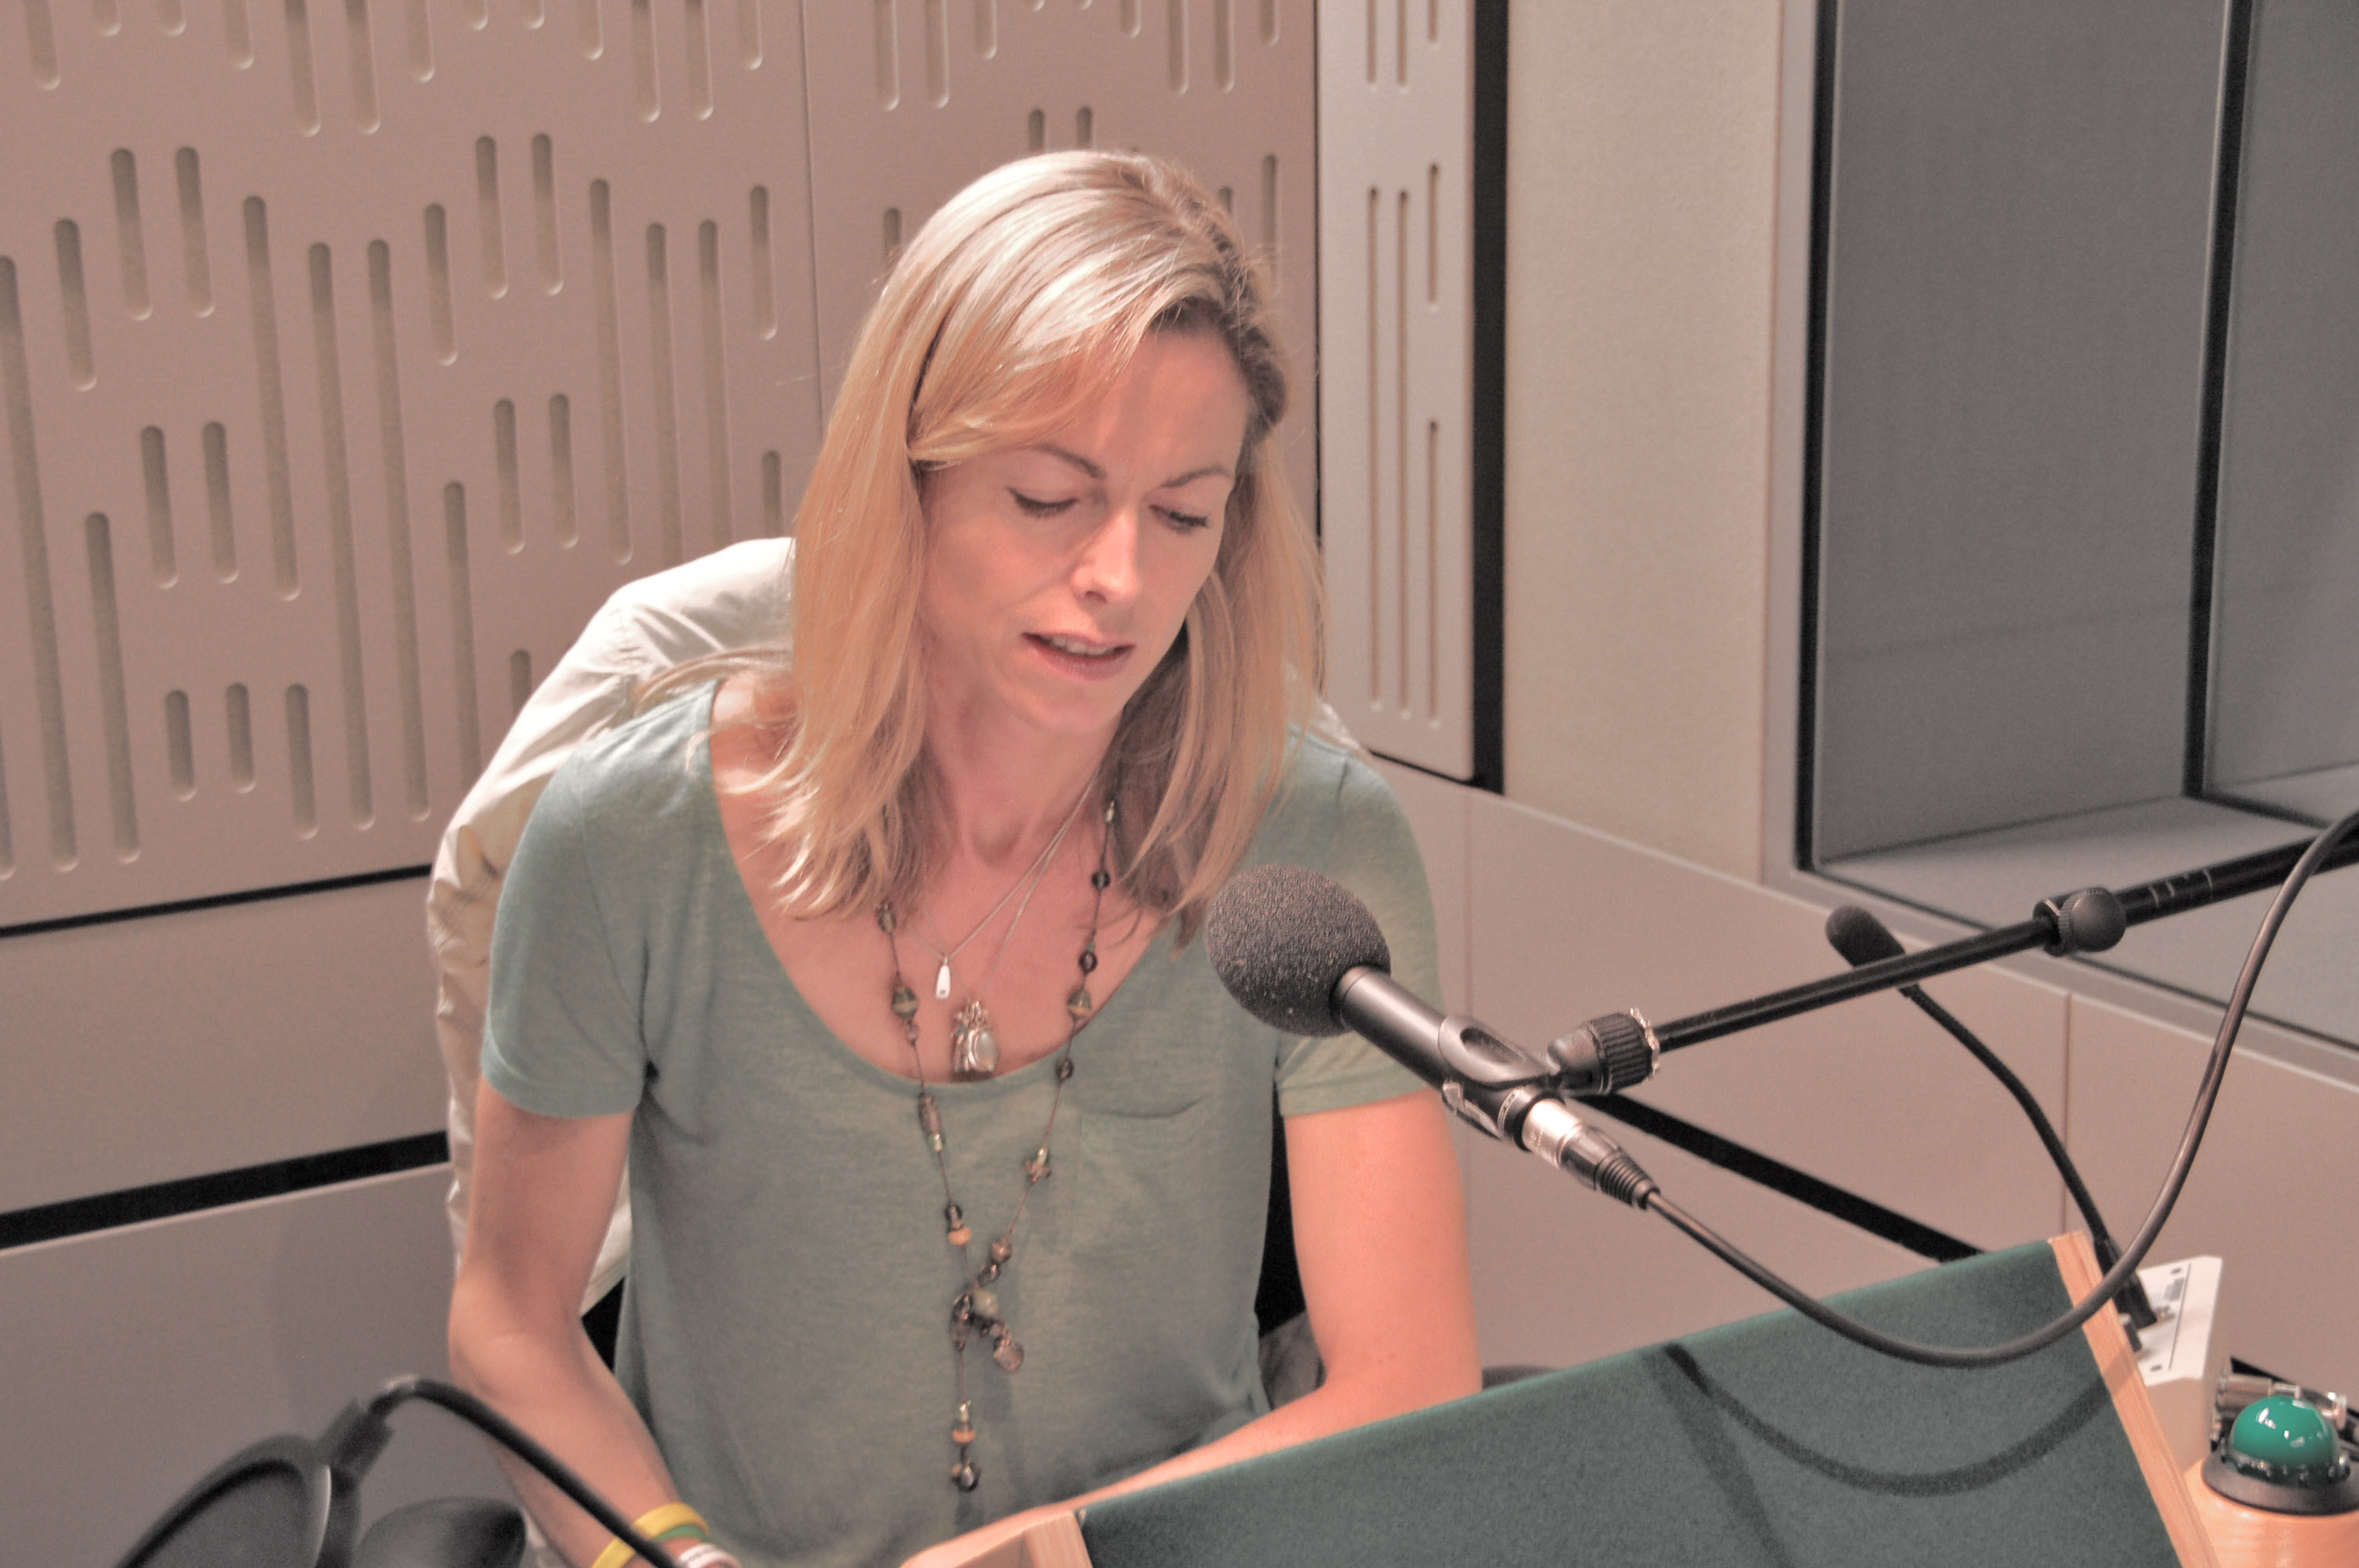 Kate McCann appeals on behalf of the families of missing people in Radio 4 charity appeal...